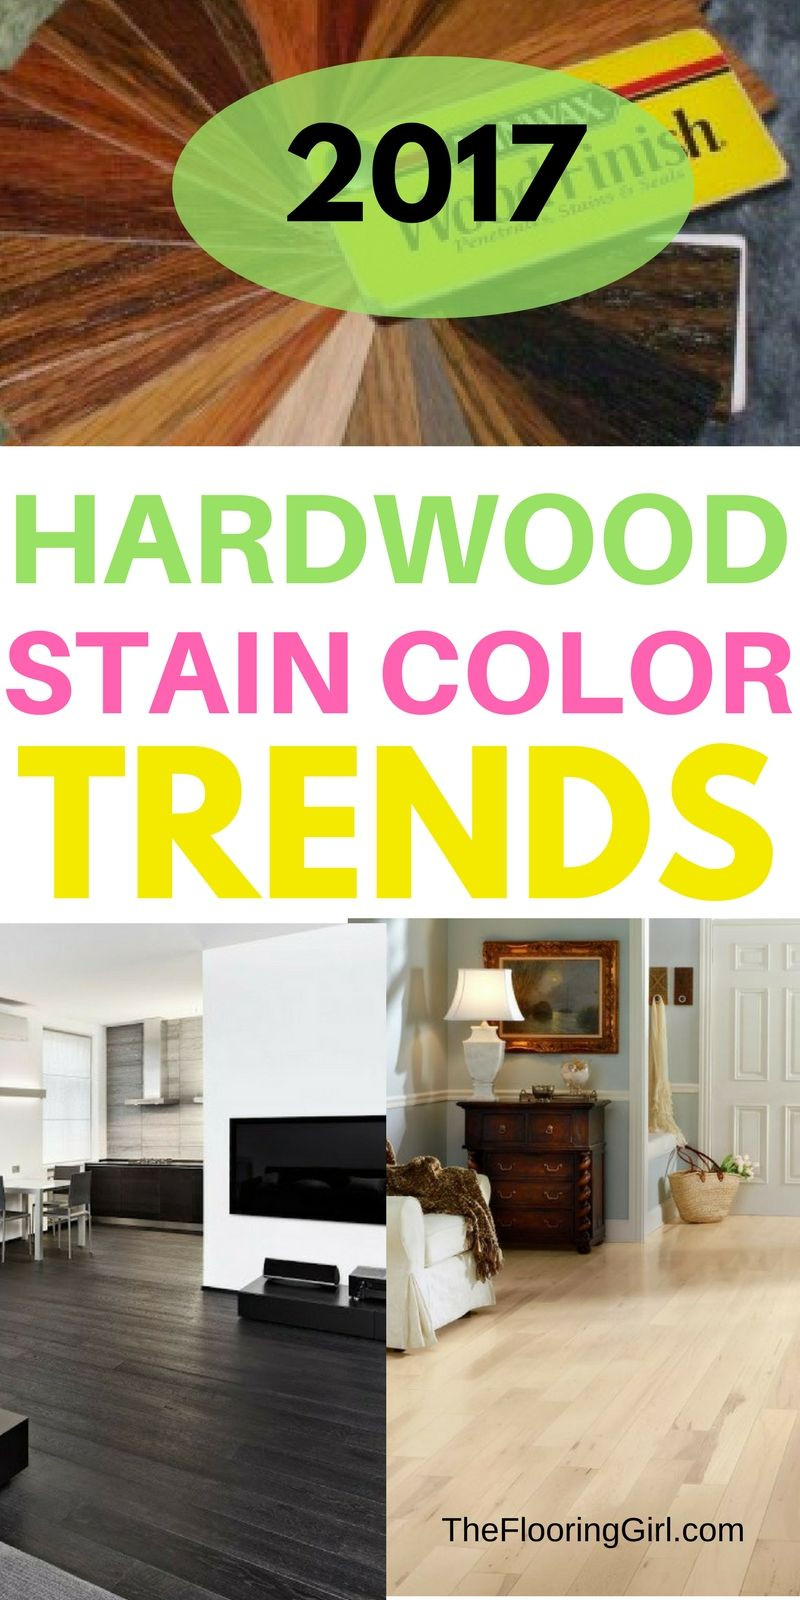 21 Nice Cheap Hardwood Flooring Seattle 2024 free download cheap hardwood flooring seattle of hardwood flooring stain color trends 2018 more from the flooring in hardwood flooring stain color trends for 2017 hardwood colors that are in style thefloo